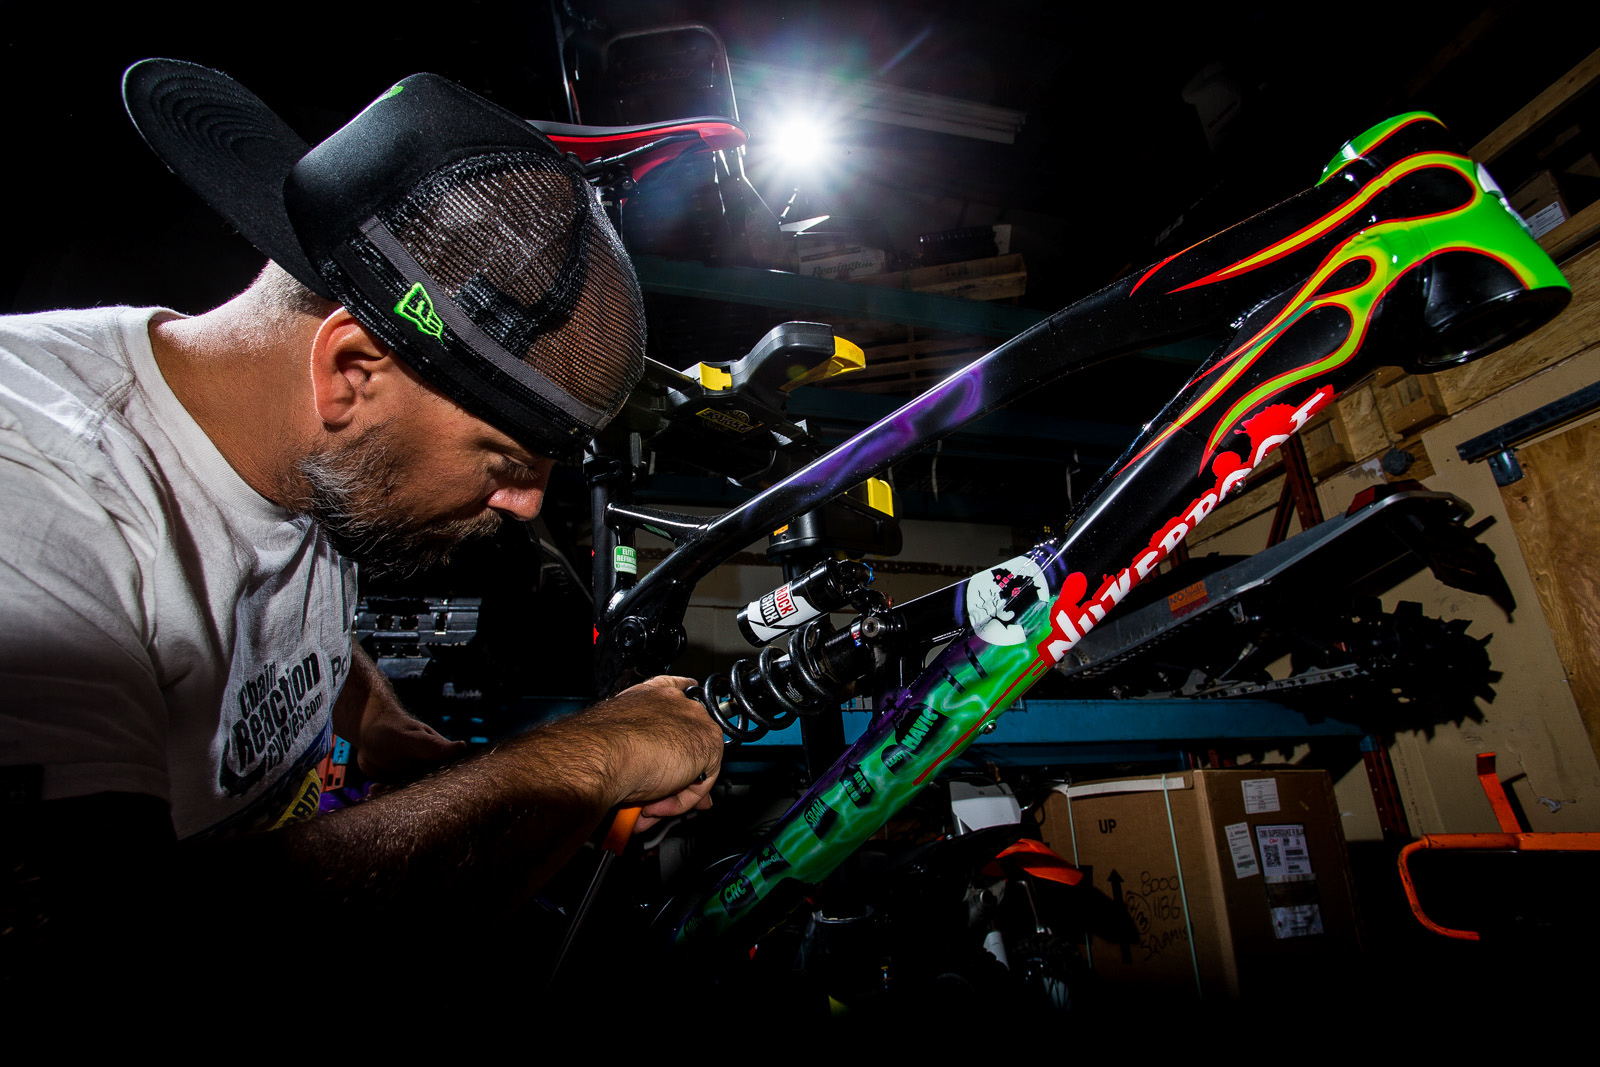 A man with an eye for even the smallest detail, ensuring that his and Sam's bike is always perfect.